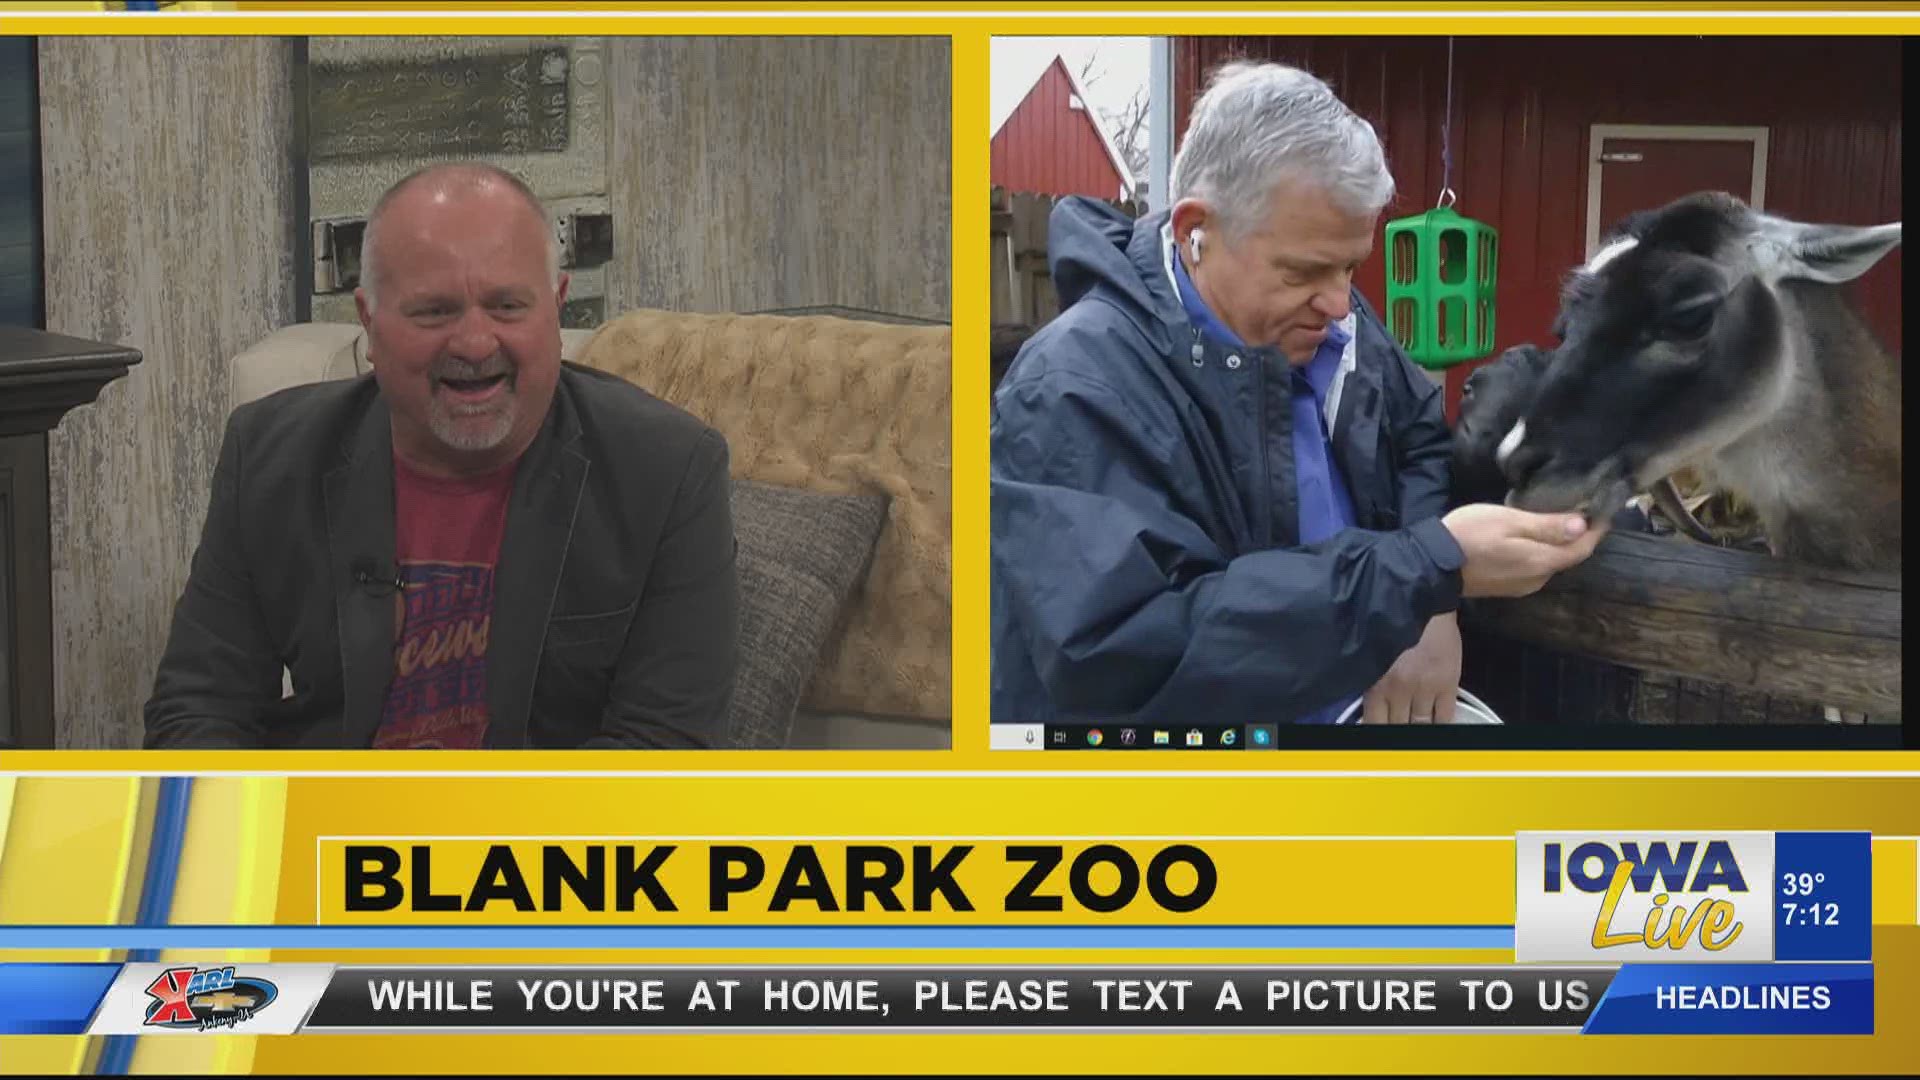 The Blank Park Zoo is bringing the Zoo to you ... They have increased their presence on Facebook with live videos featuring educational activities & animal webcams